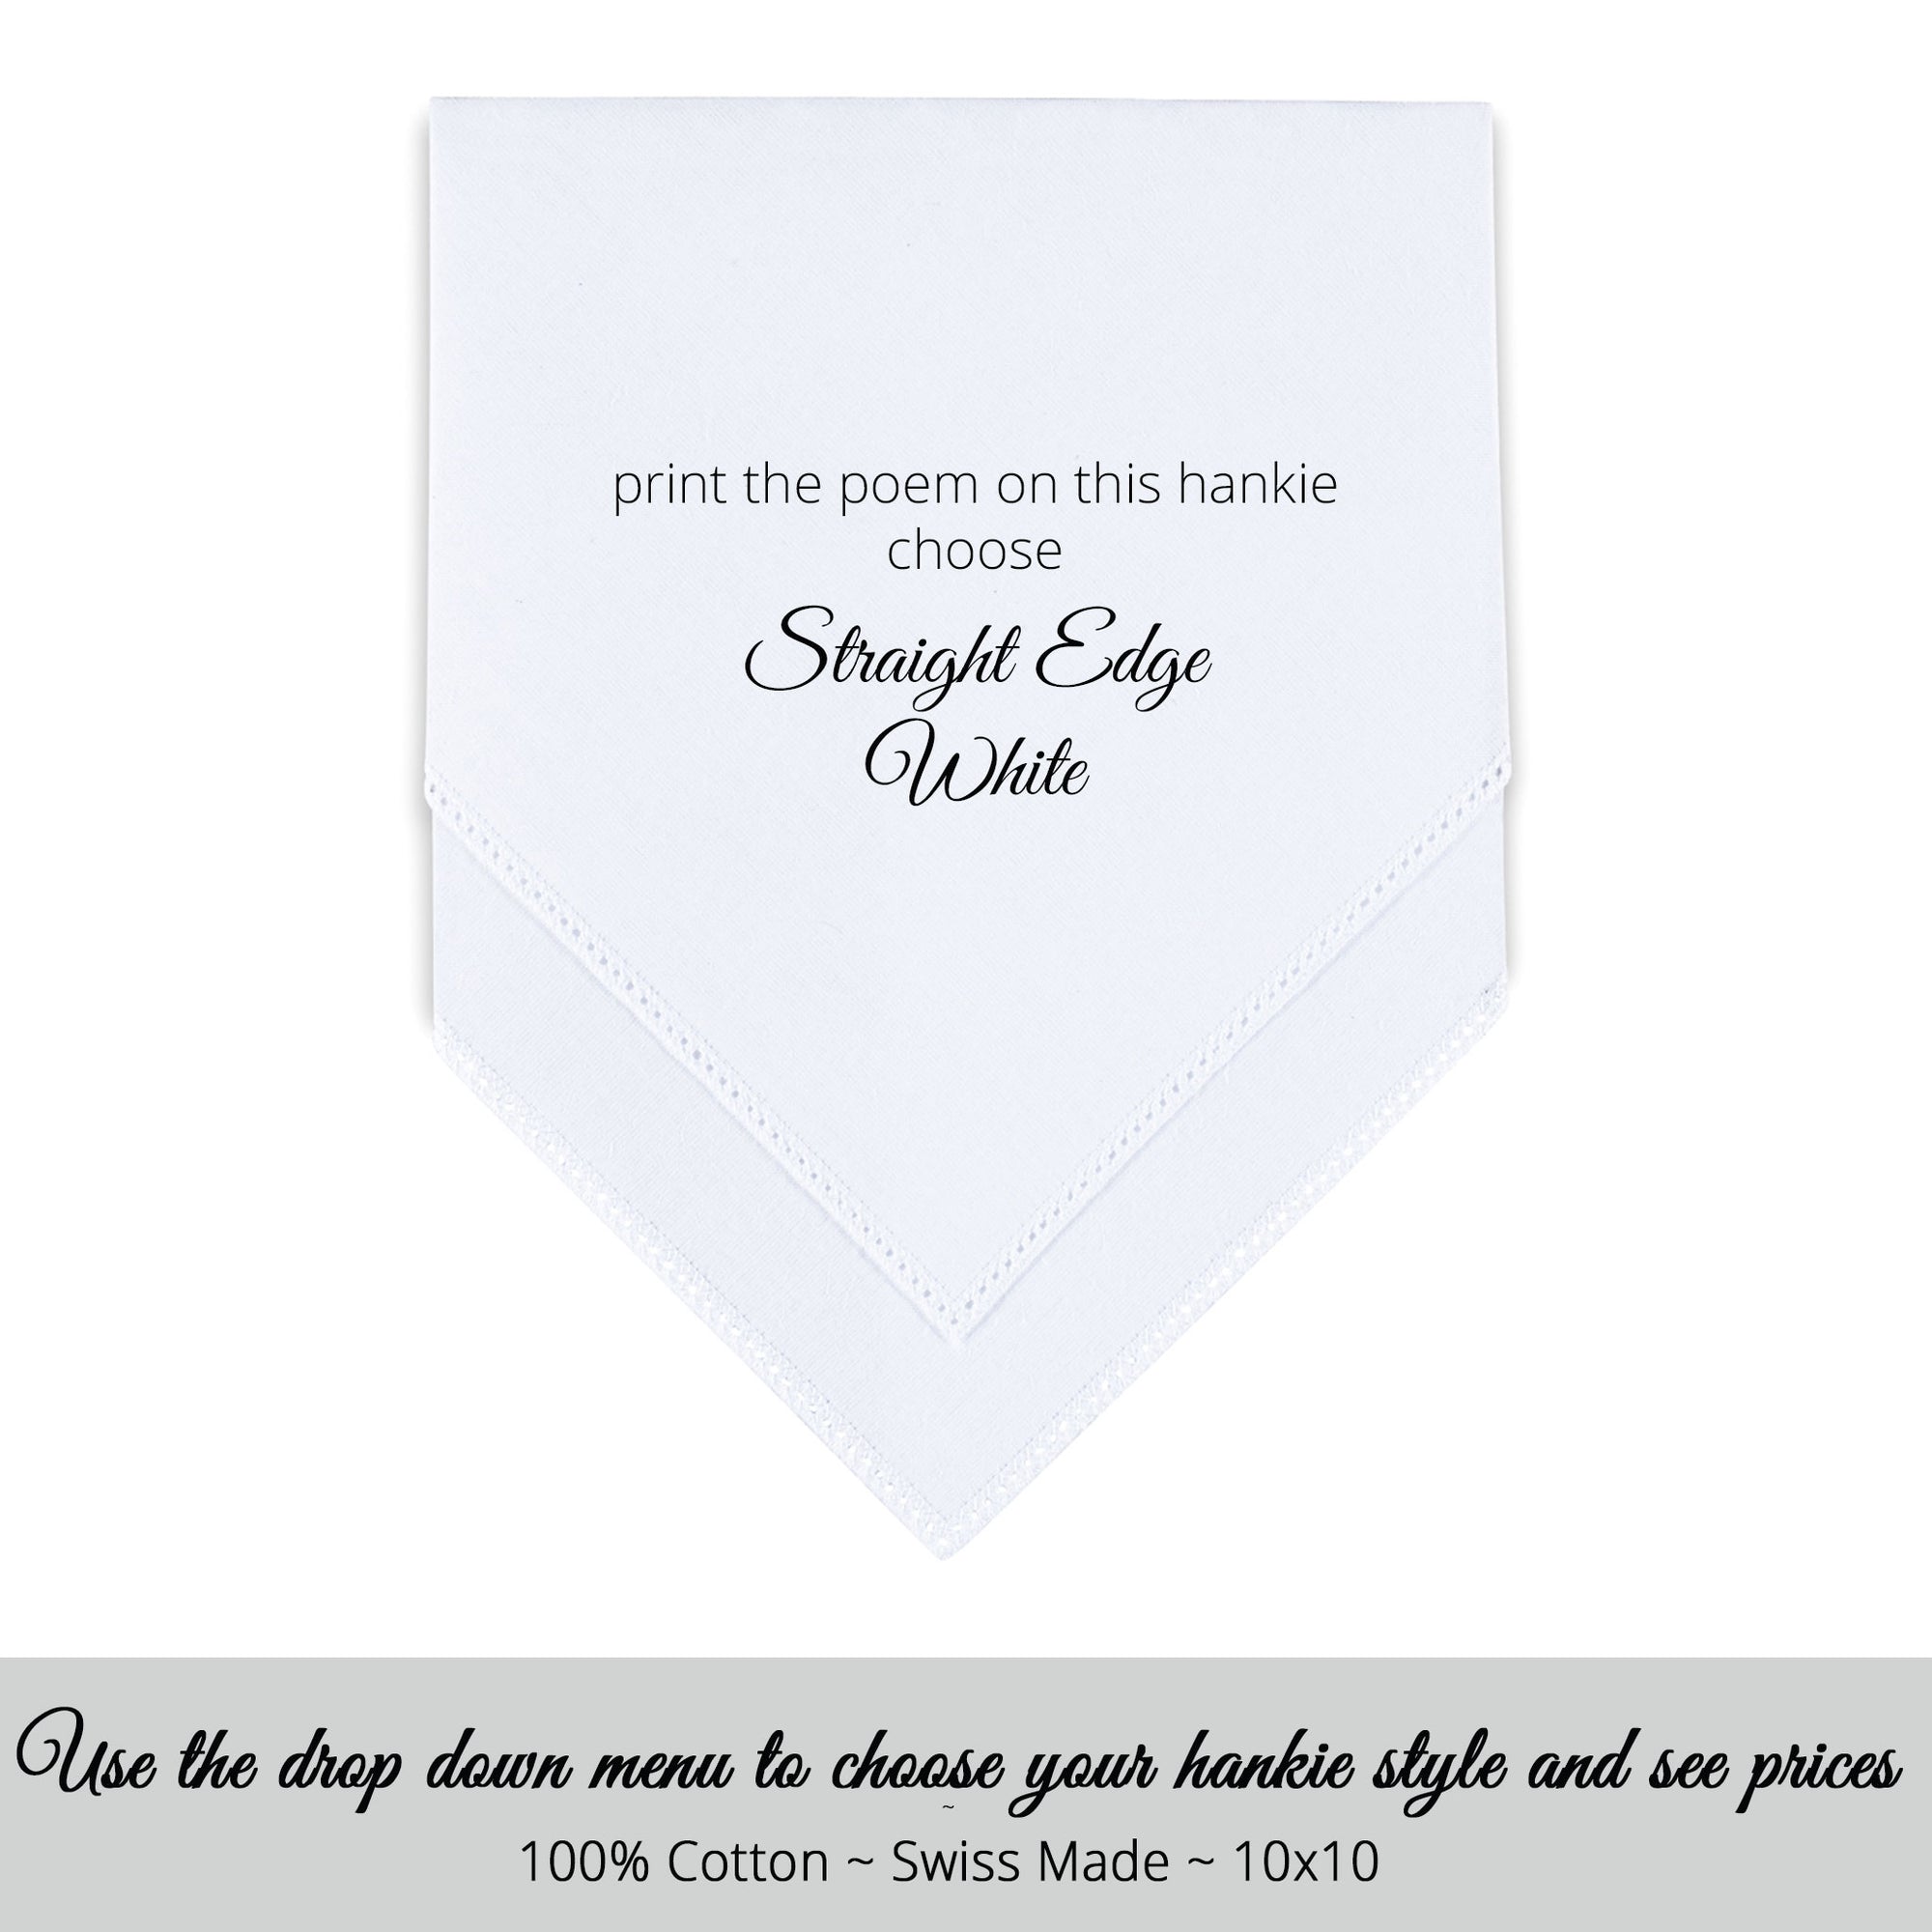 Wedding Handkerchief Scalloped edge white personalized poem for the stepmother